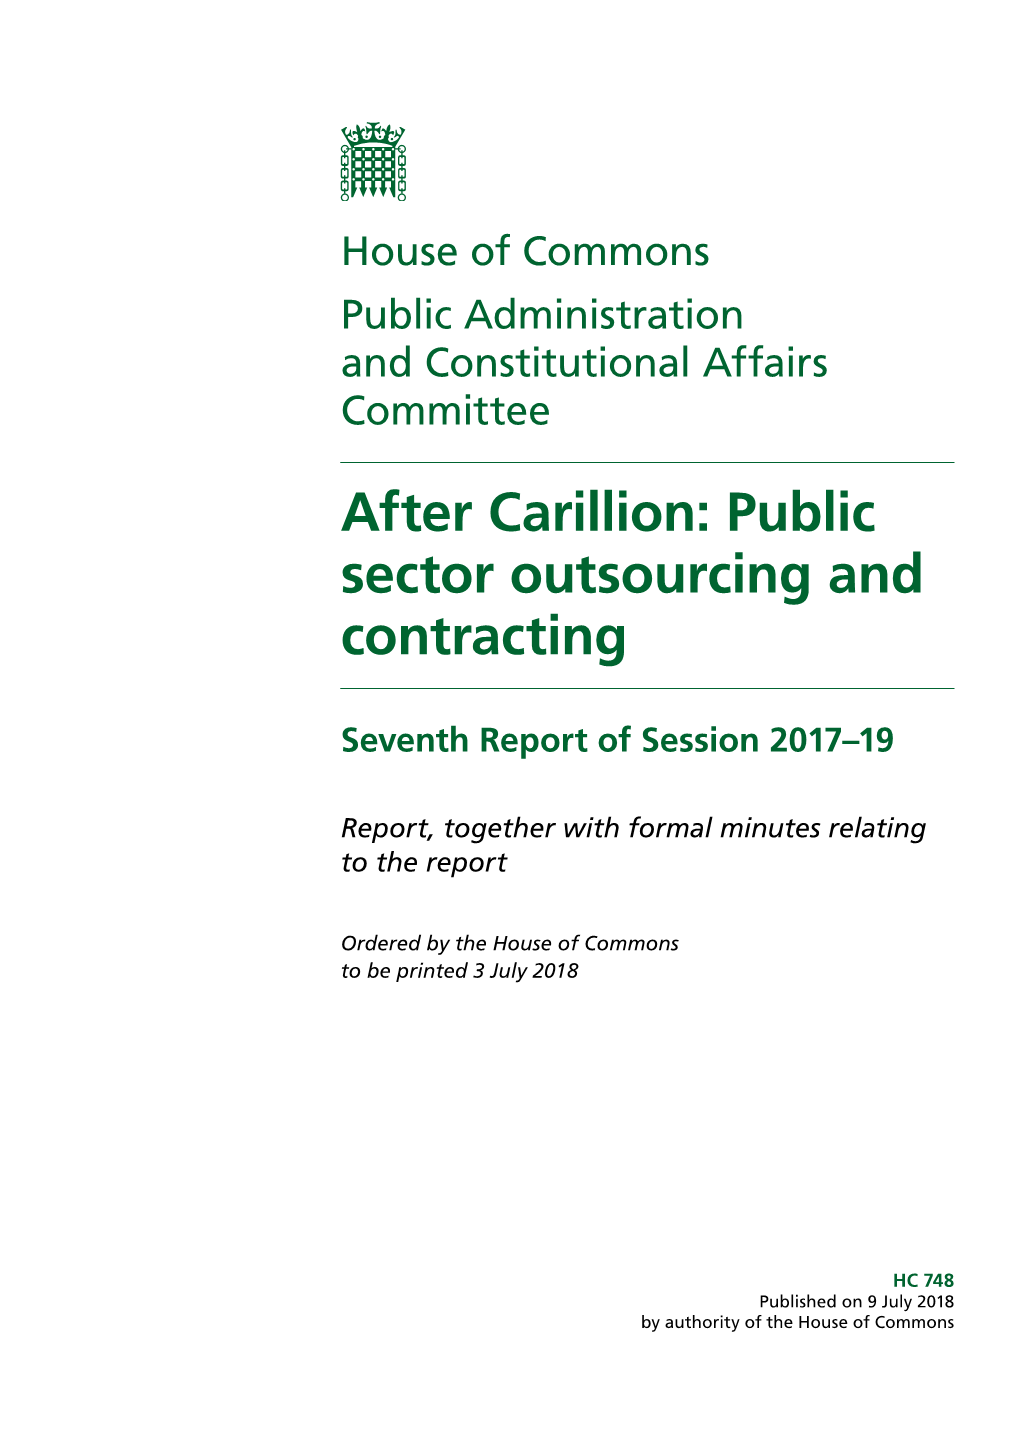 After Carillion: Public Sector Outsourcing and Contracting